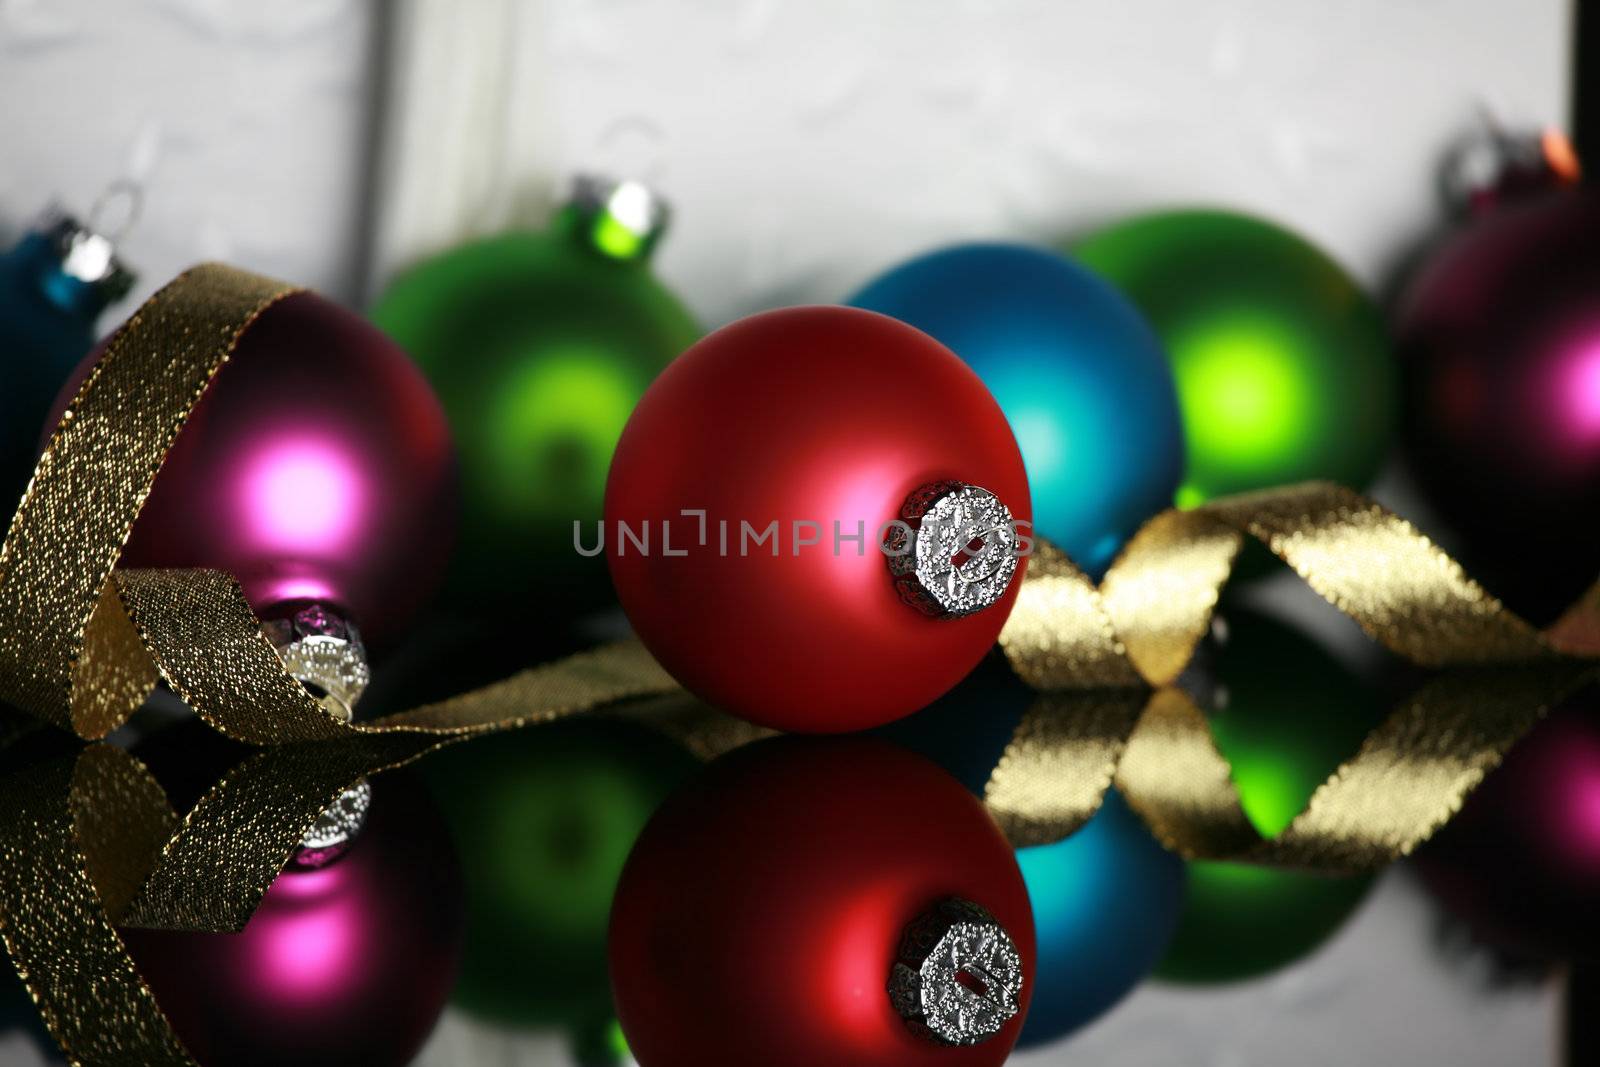 Christmas ornaments and gold ribbon on reflective surface, shallow DOF on red ornament